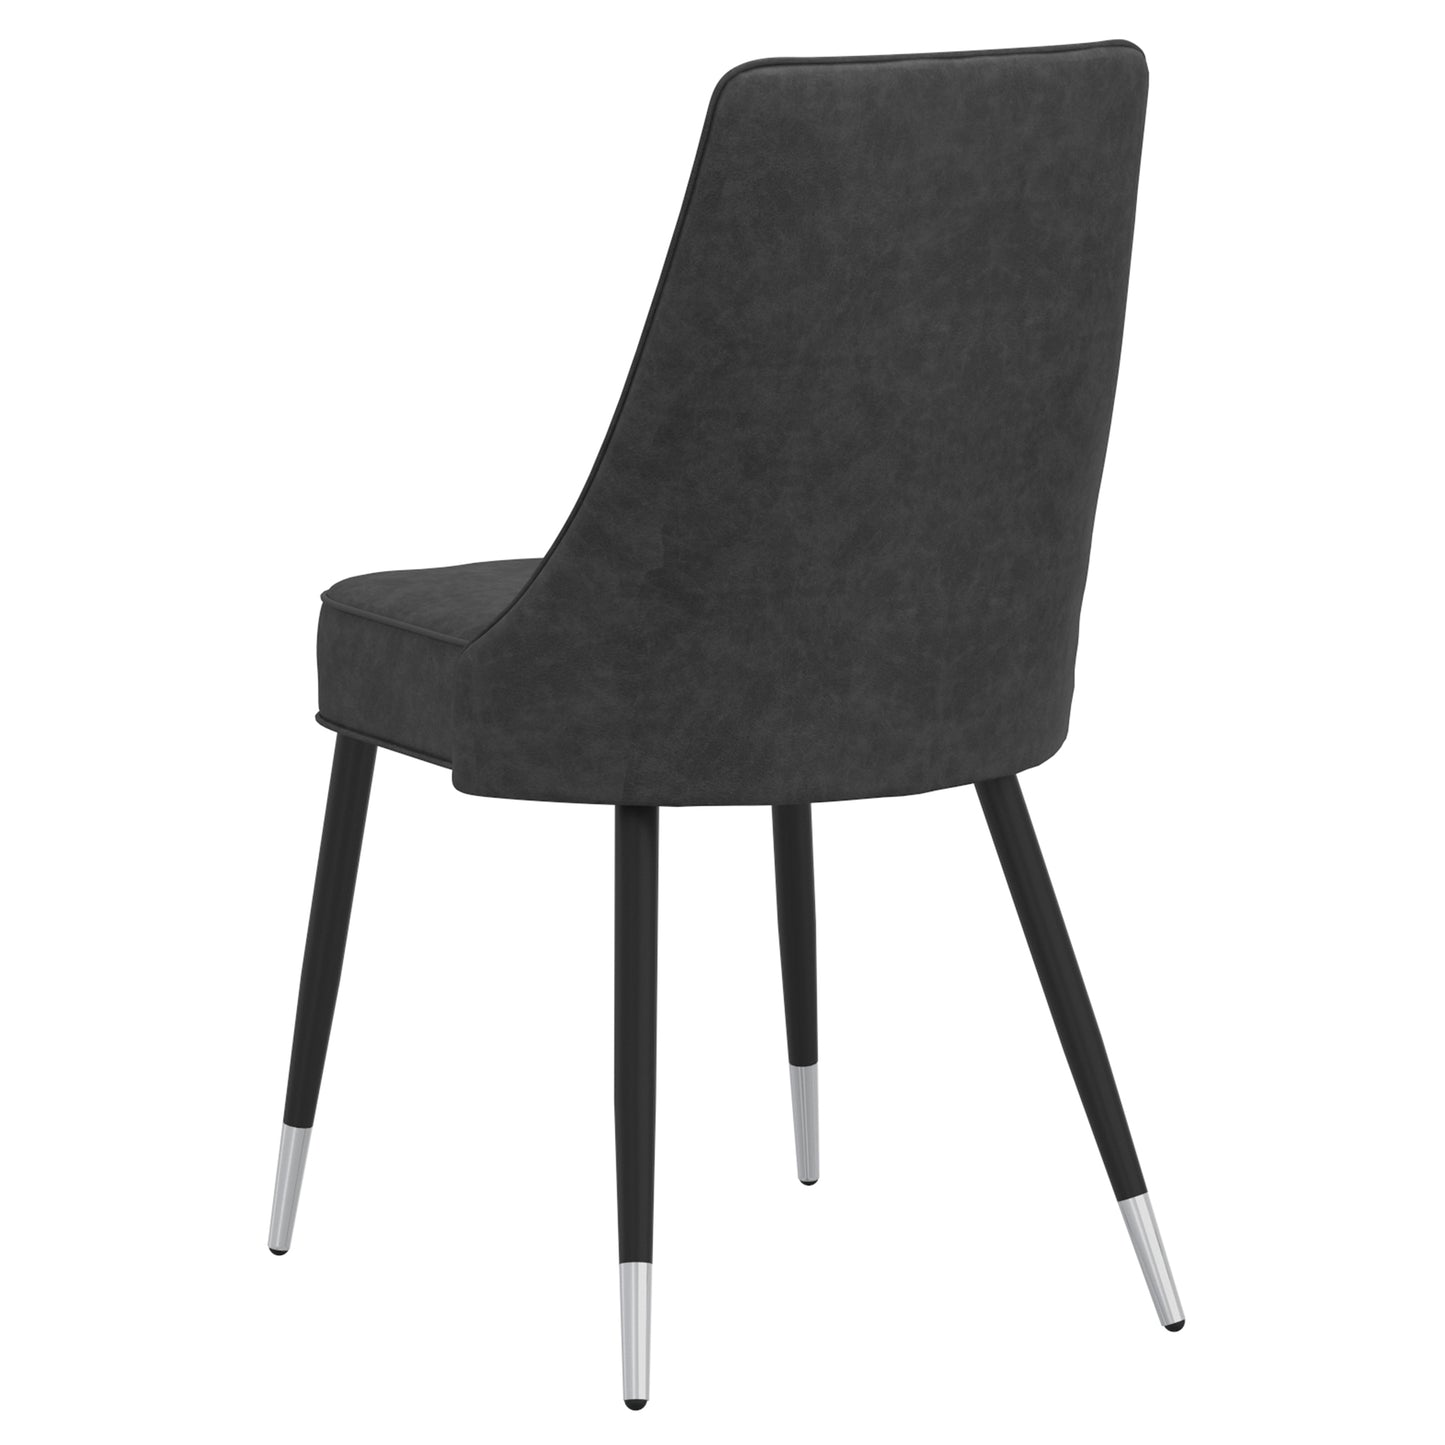 (SILVANO DARK GREY- 2 PACK)- LEATHER DINING CHAIRS